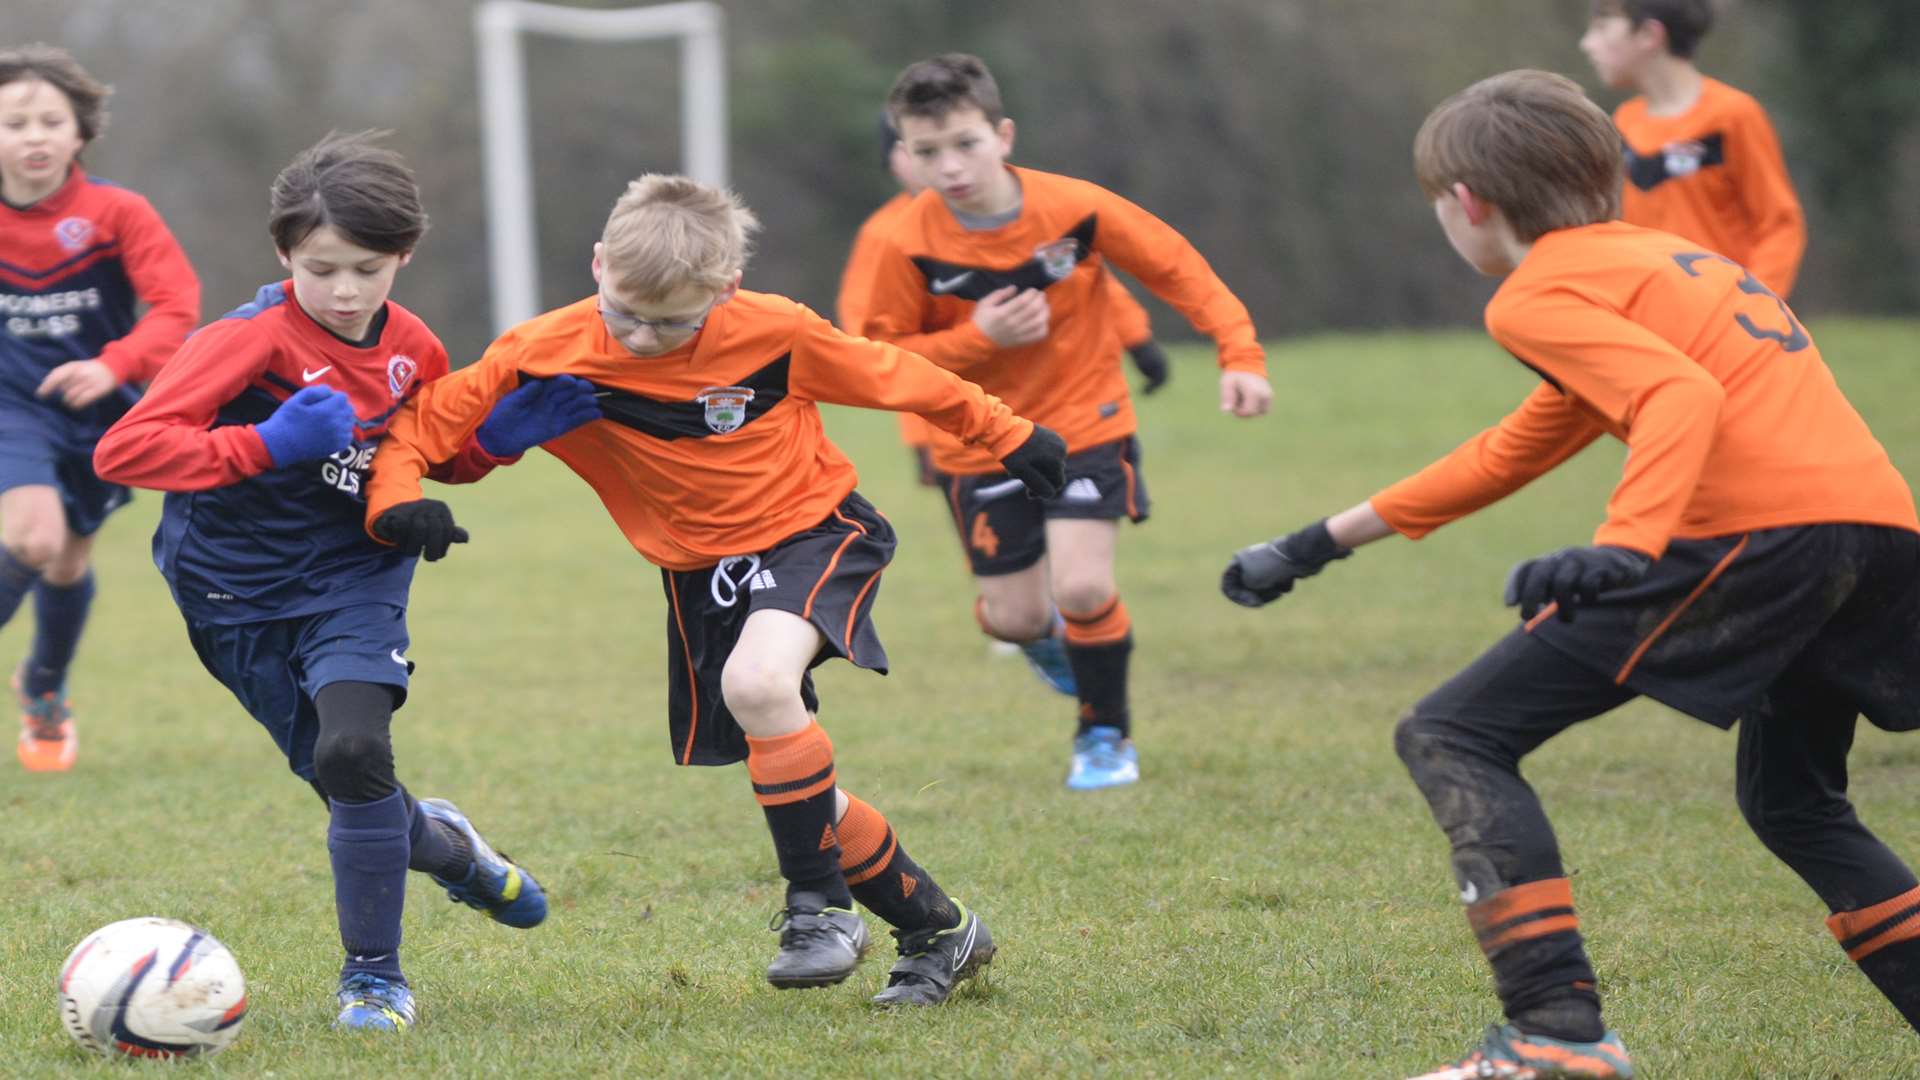 Hempstead Valley's under-10s (red and blue) up against Lordswood Picture: Ruth Cuerden